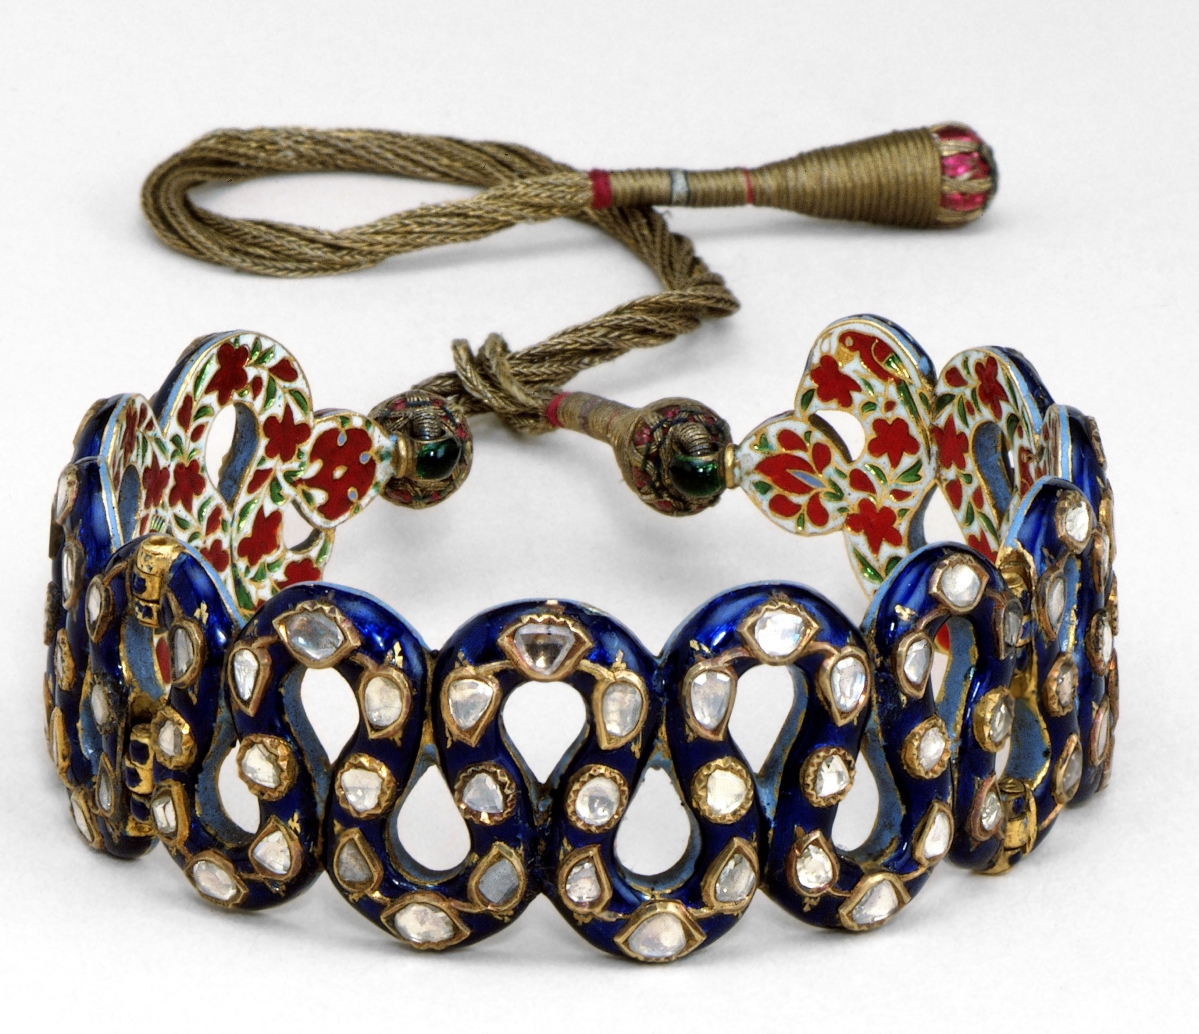 Gold and enamelled bracelet set with diamonds, shown at the Great Exhibition, made in Rajasthan by an India artist, circa 1850. ©Victoria and Albert Museum, London